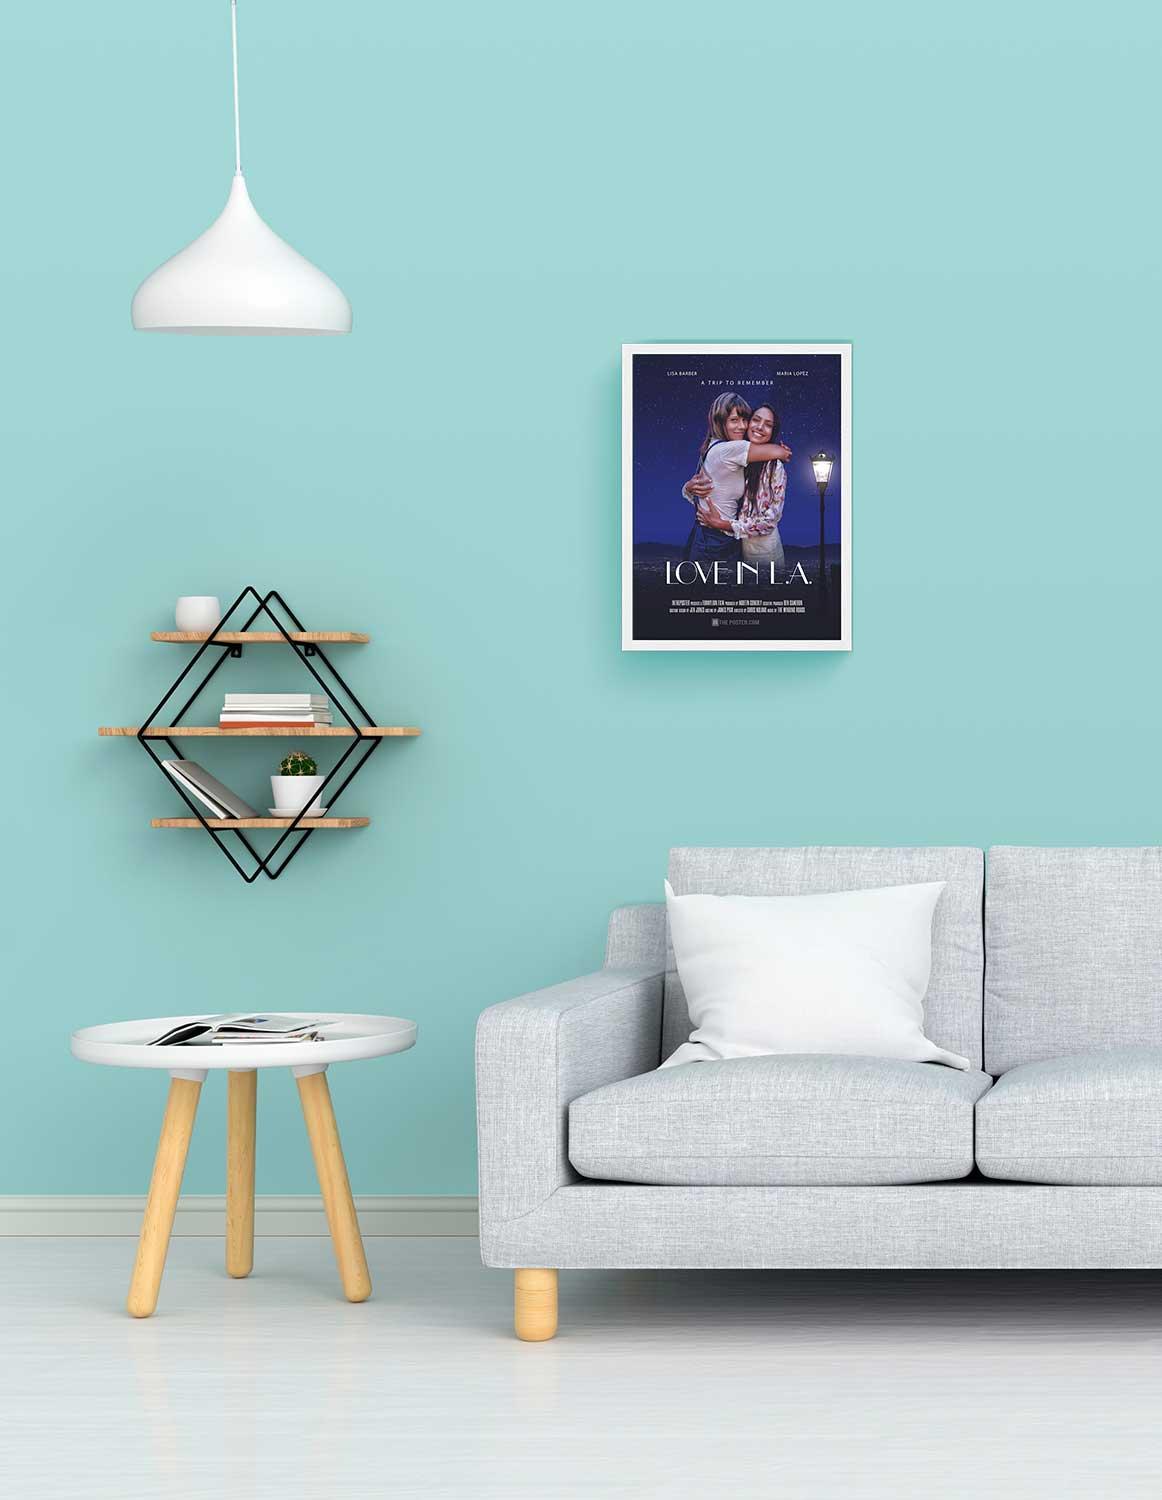 Love In LA love movie poster in a small white frame, on the wall above a grey sofa